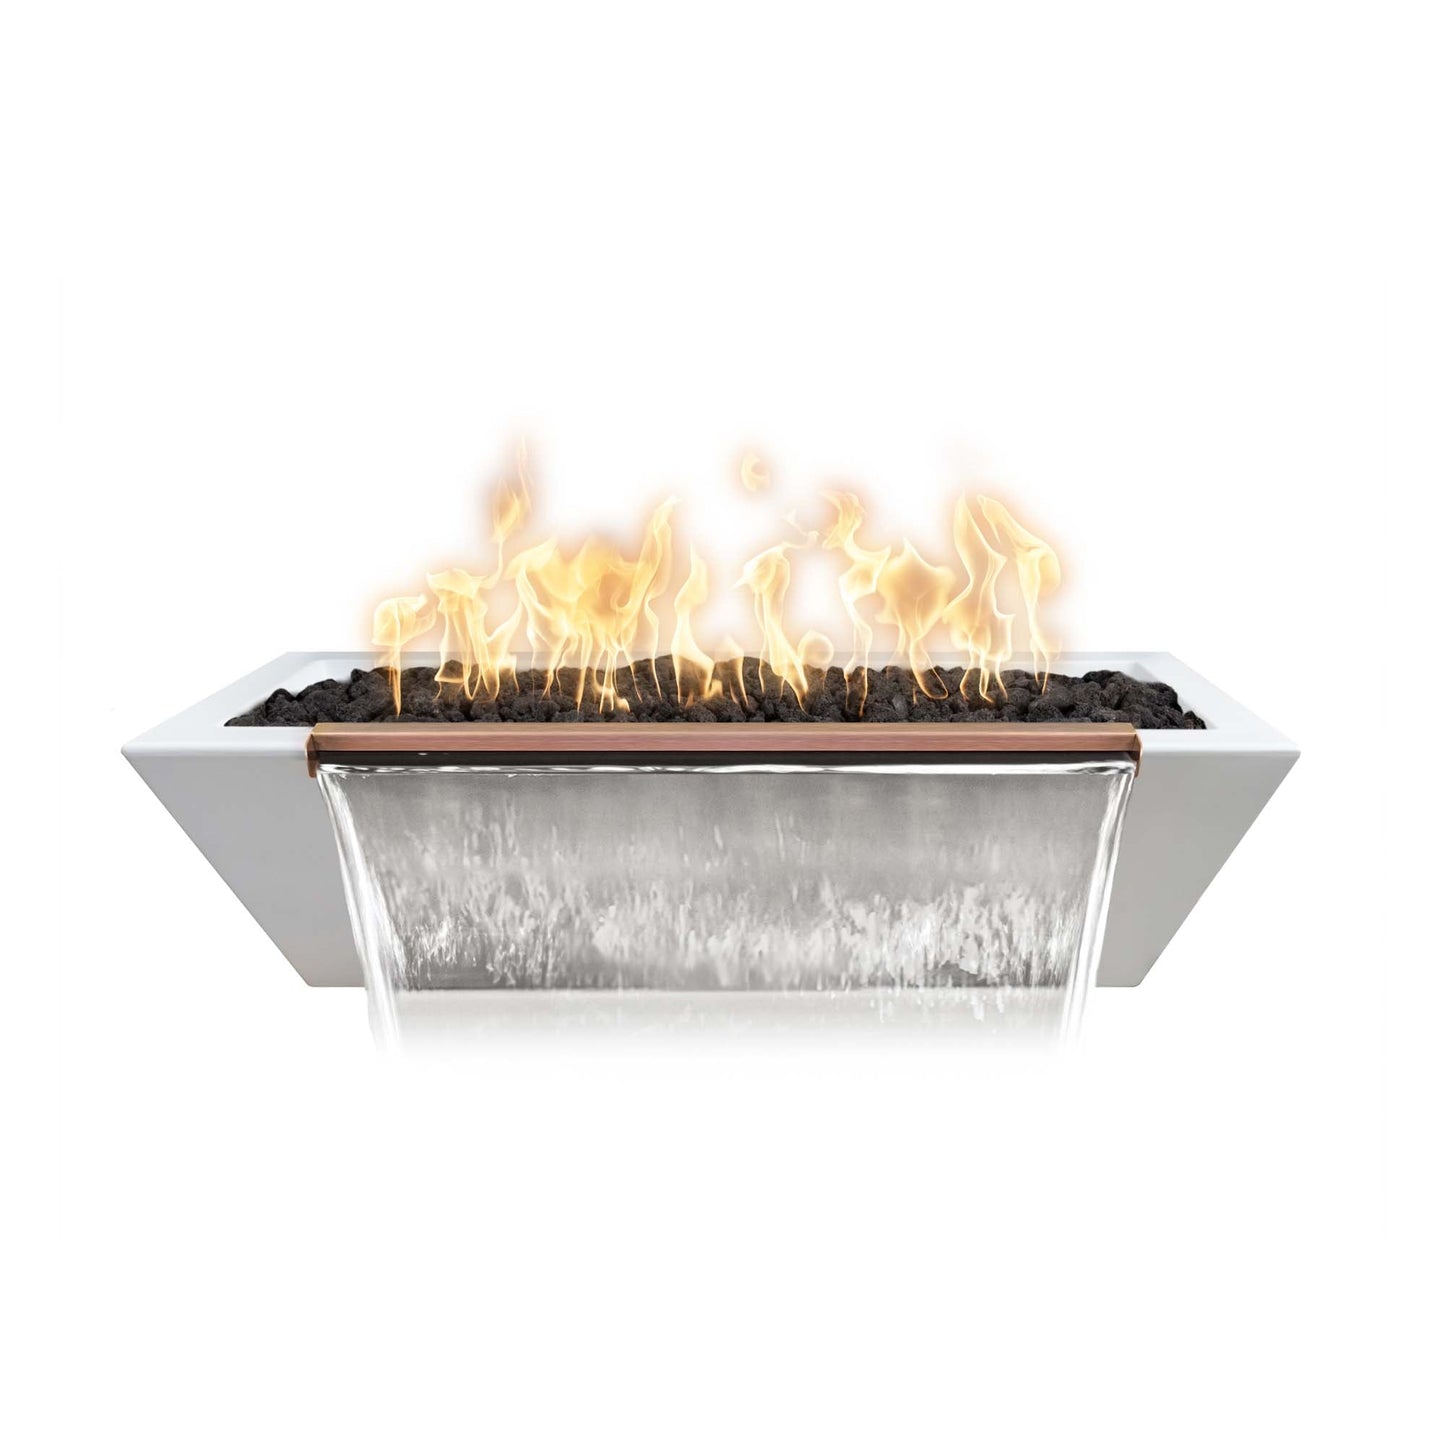 The Outdoor Plus Linear Maya 60" Ash GFRC Concrete Liquid Propane Fire & Water Bowl with Match Lit with Flame Sense Ignition